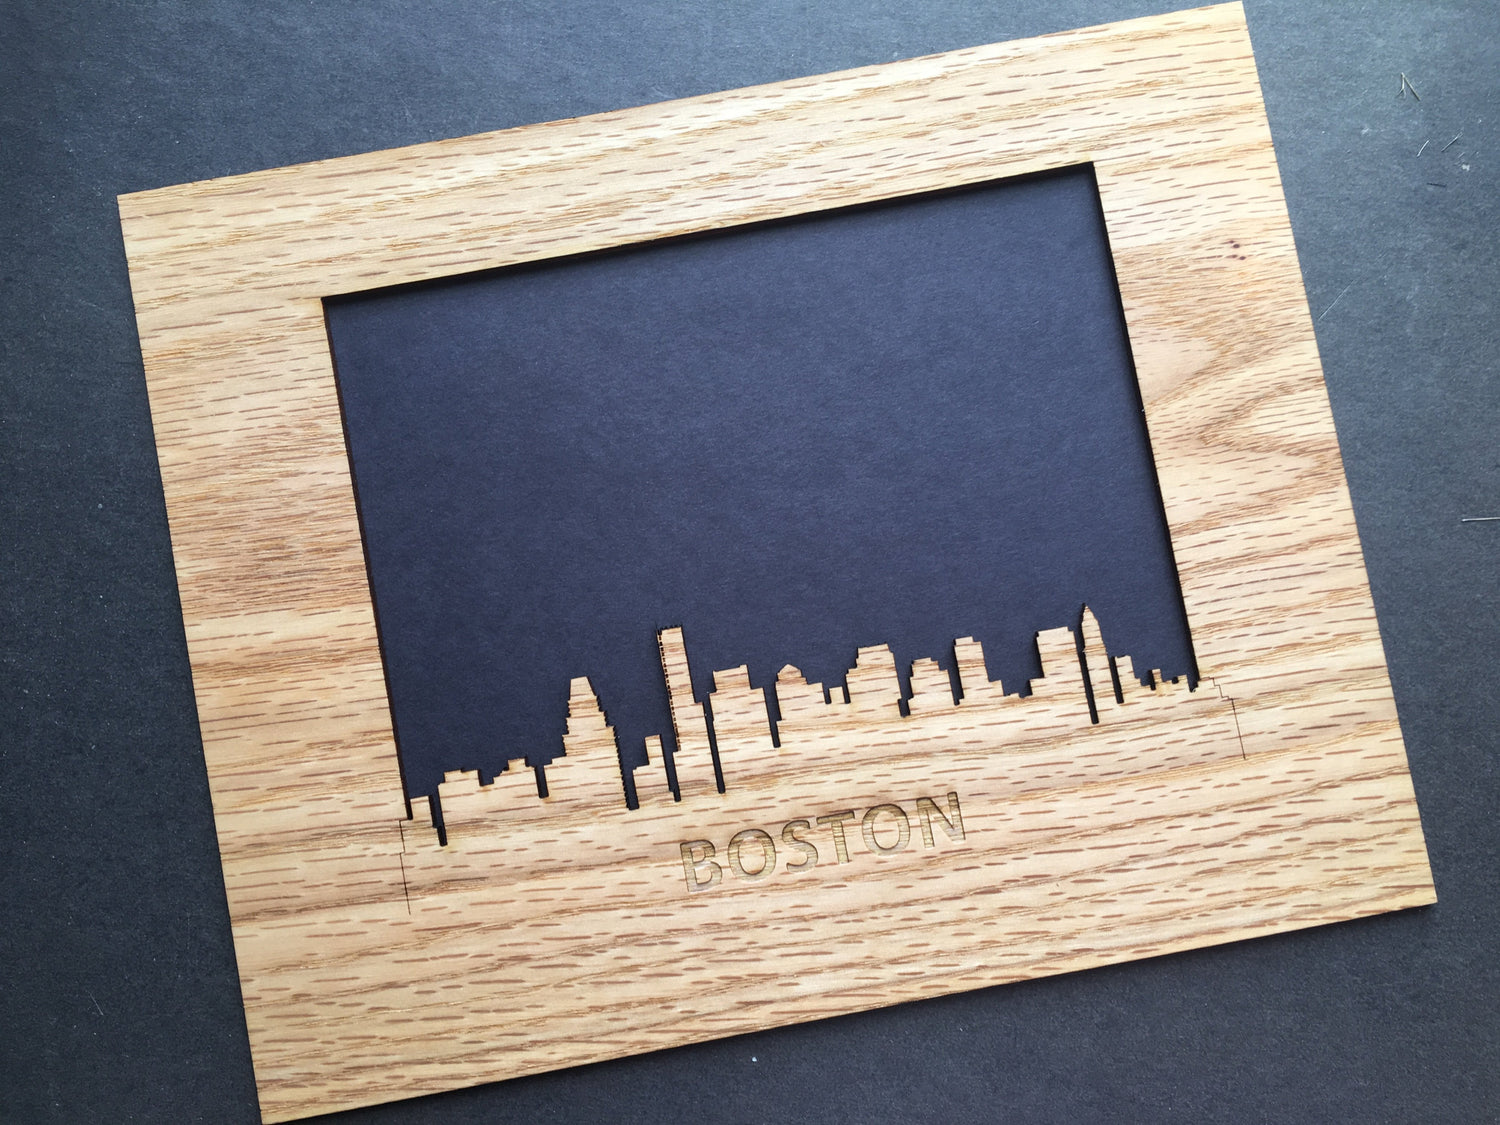 8x10 Boston Picture Frame-Legacy Images